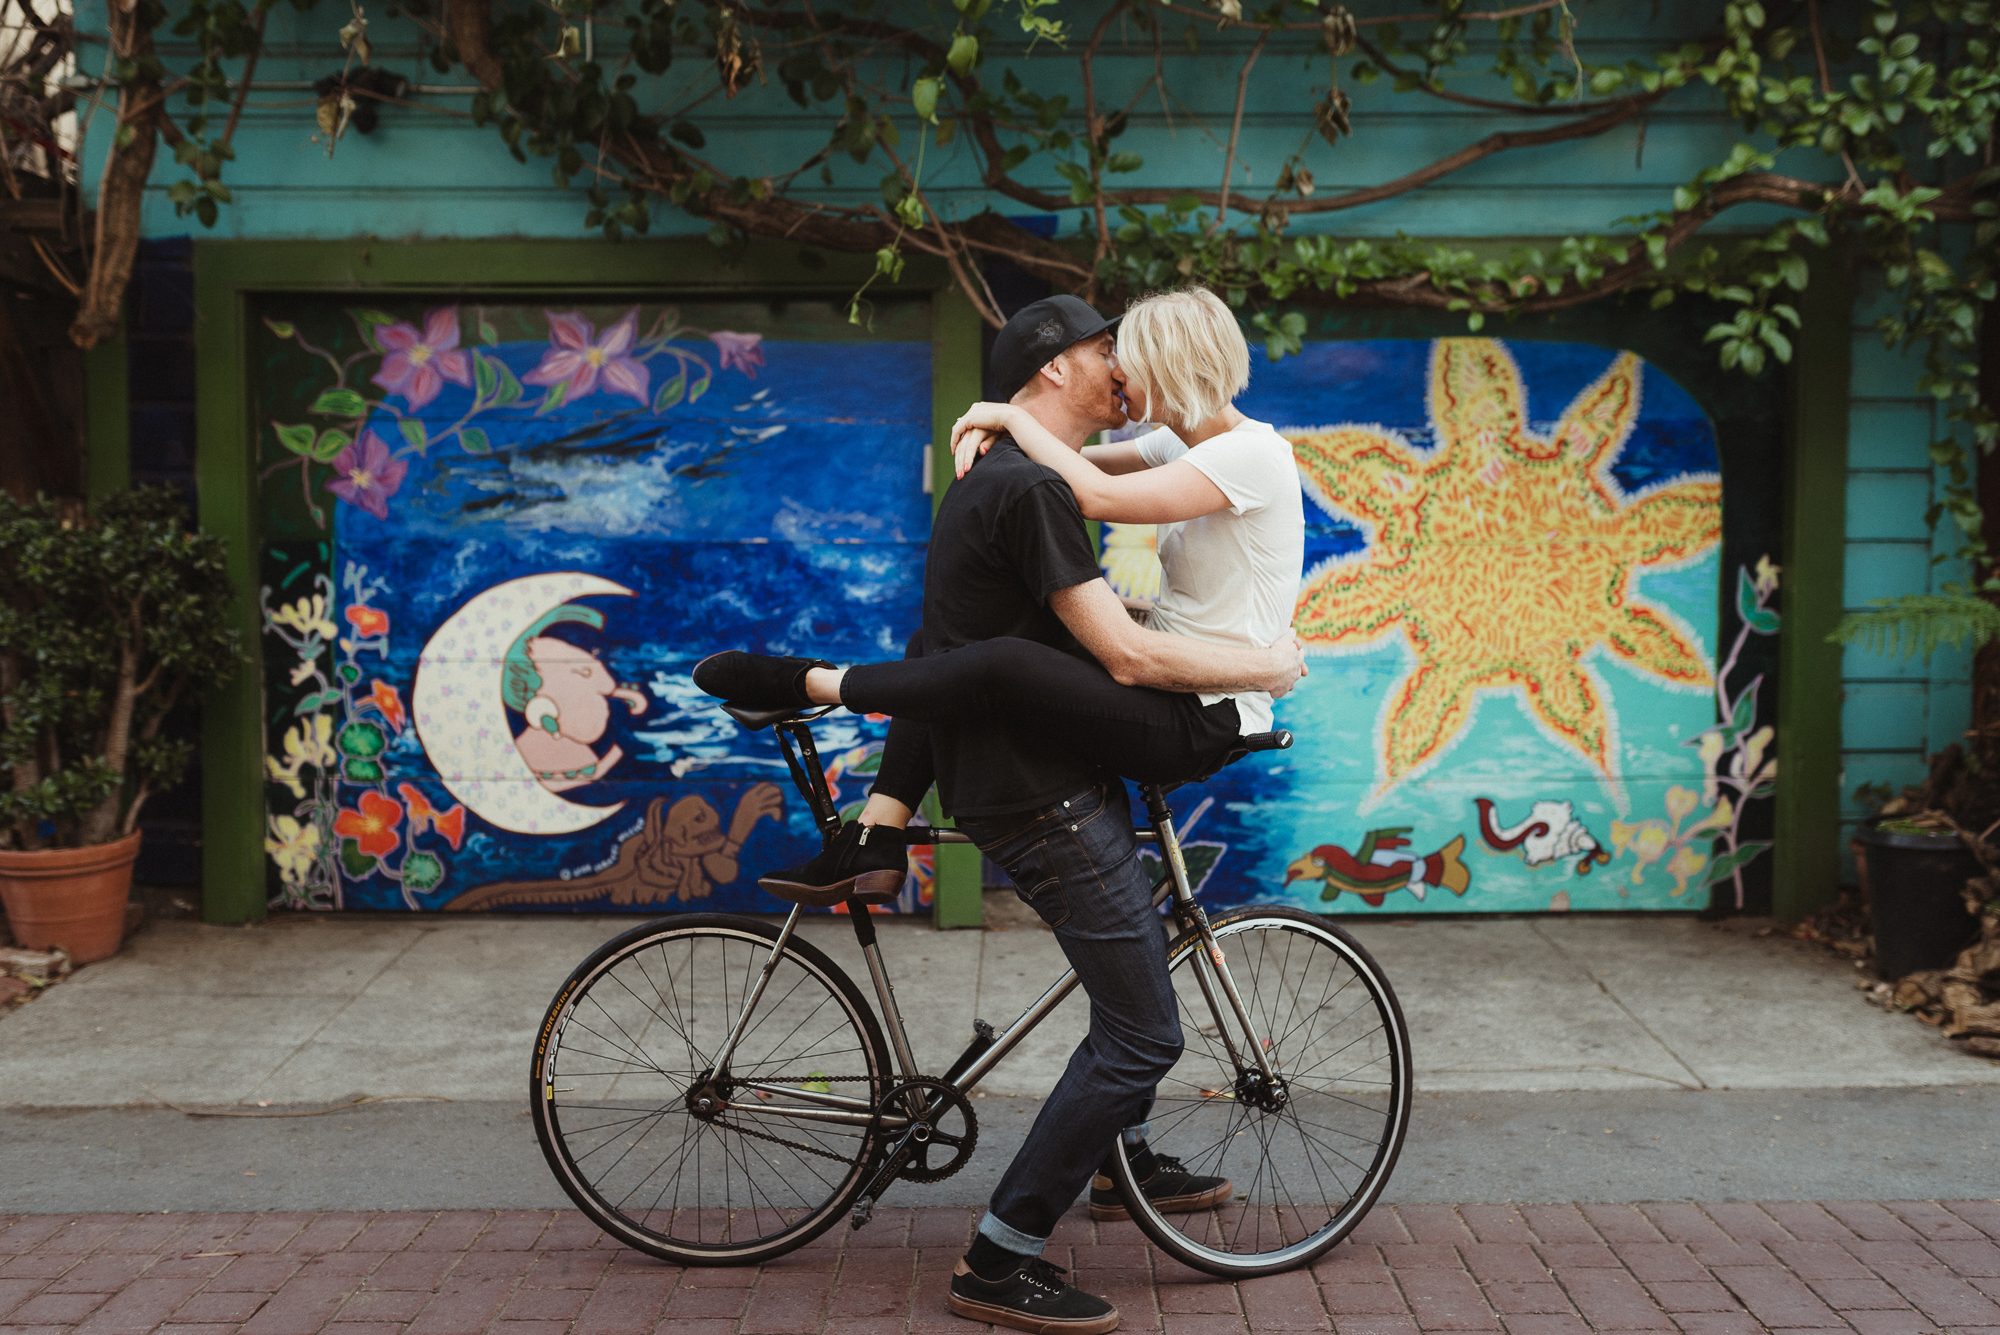 Portrait Photography on bikes for Engagement Session in San Fran